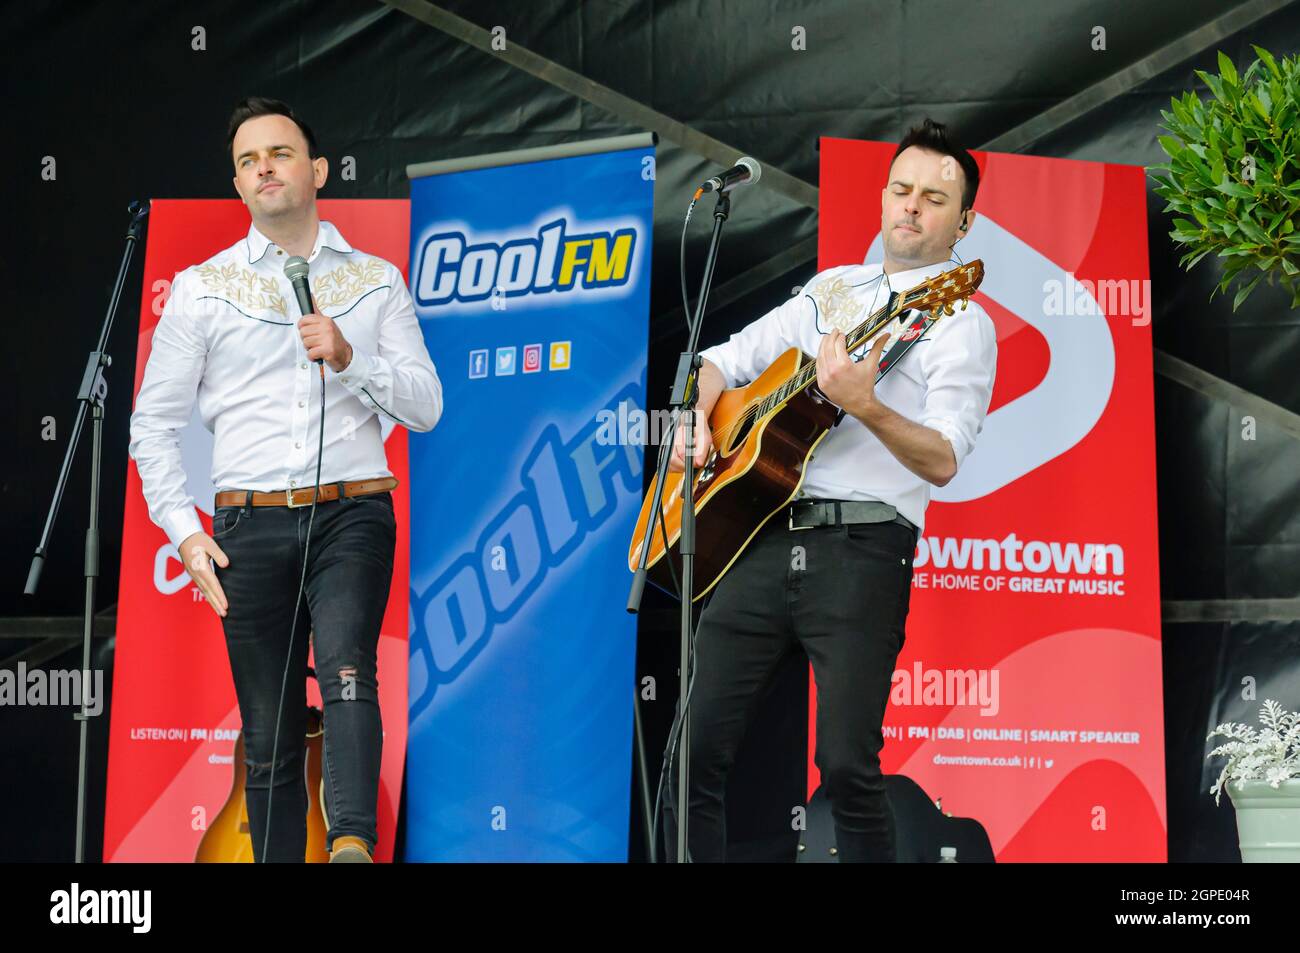 Ennis Brothers, a Dublin-based country music band of Matthew and Owen Ennis, performing at the Balmoral Show, Lisburn, Northern Ireland. Stock Photo